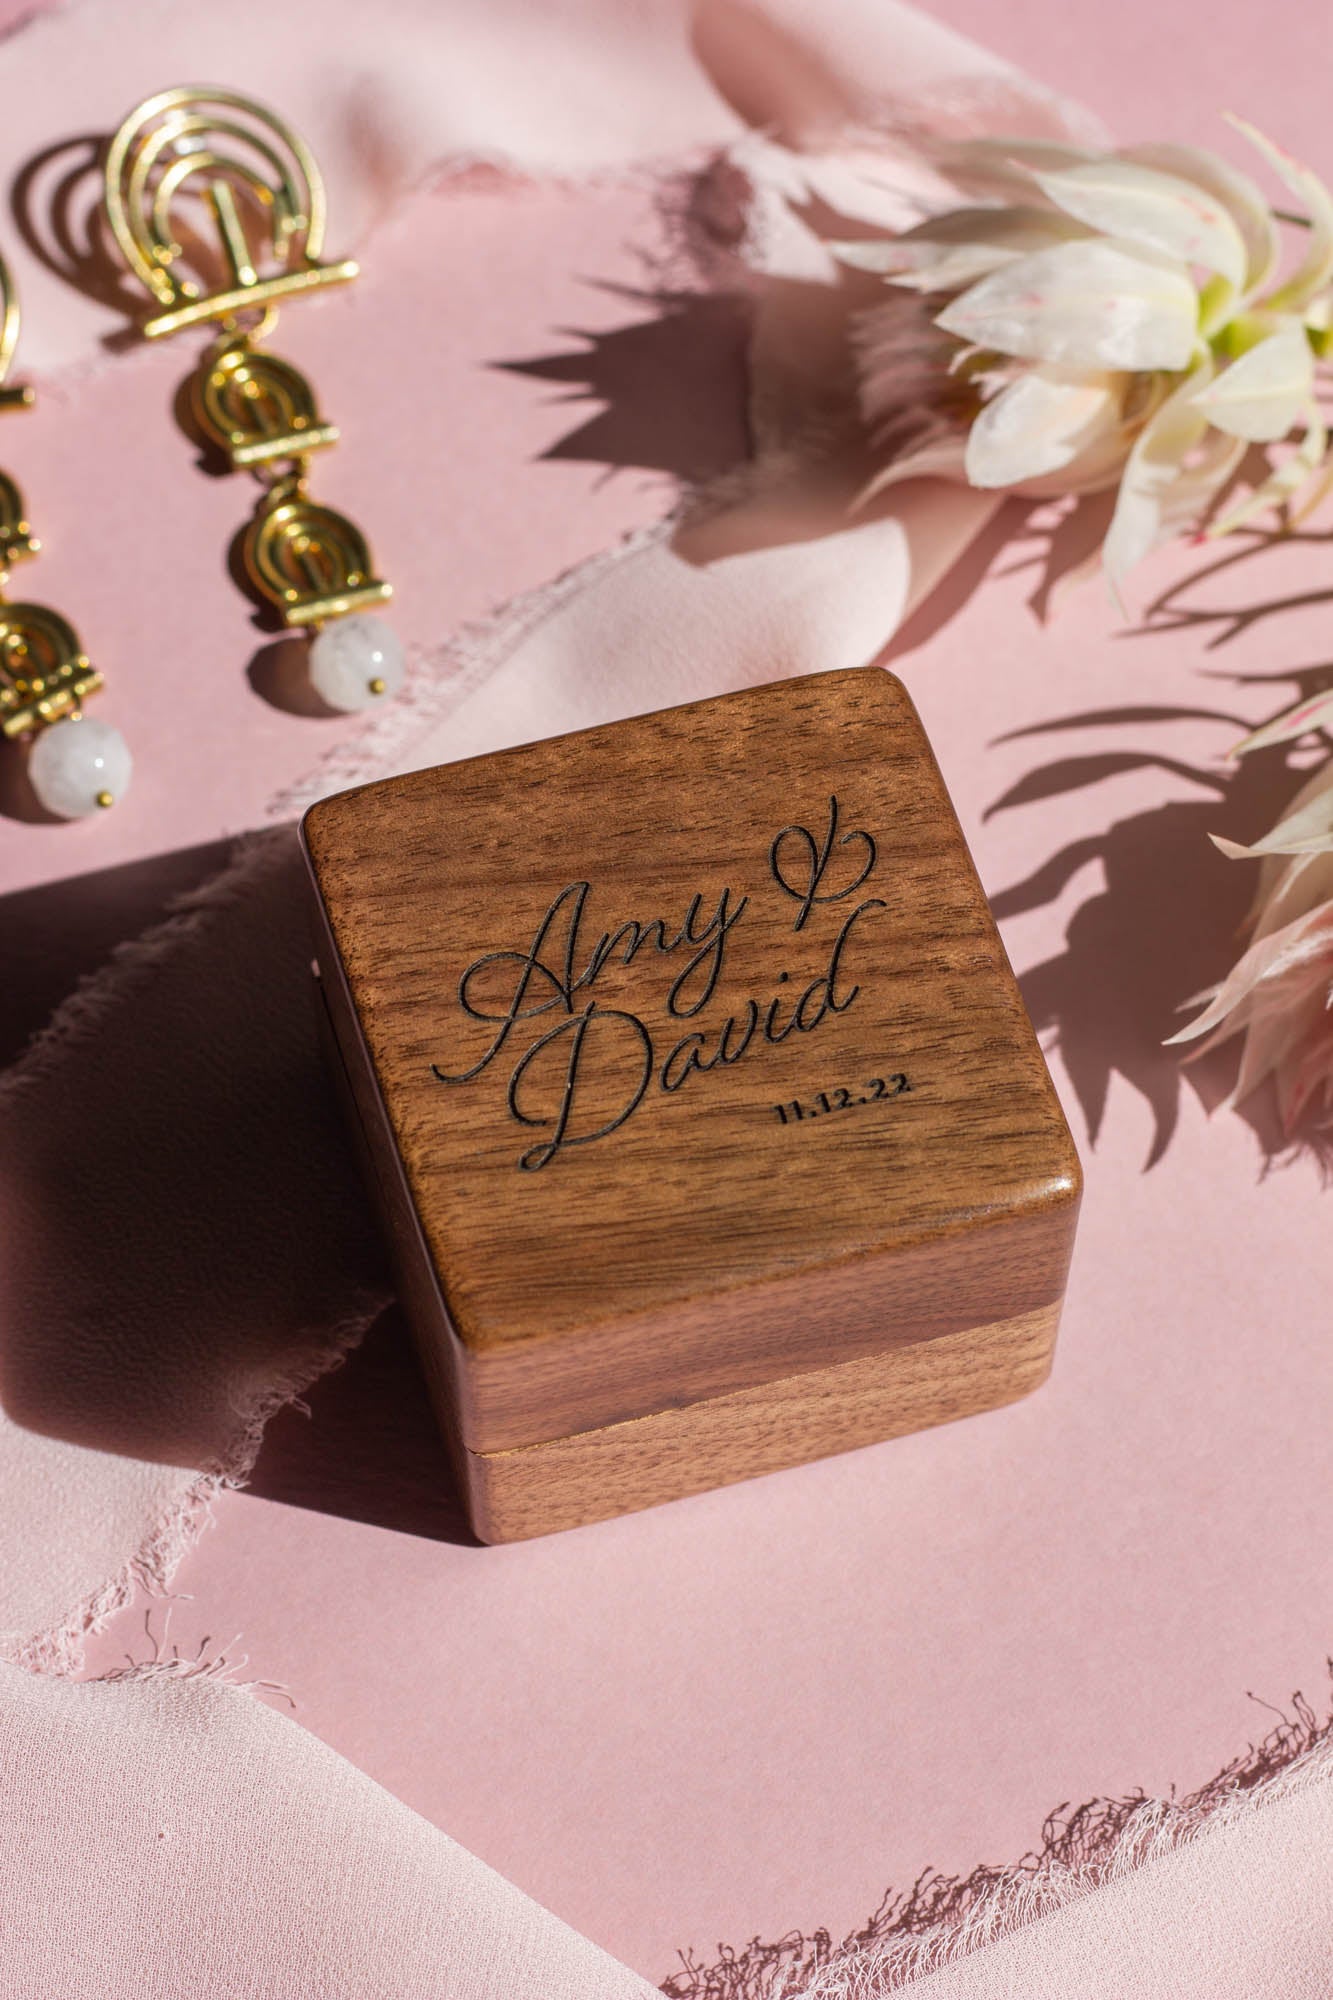 Elegant Ring Boxes for a Perfect Proposal